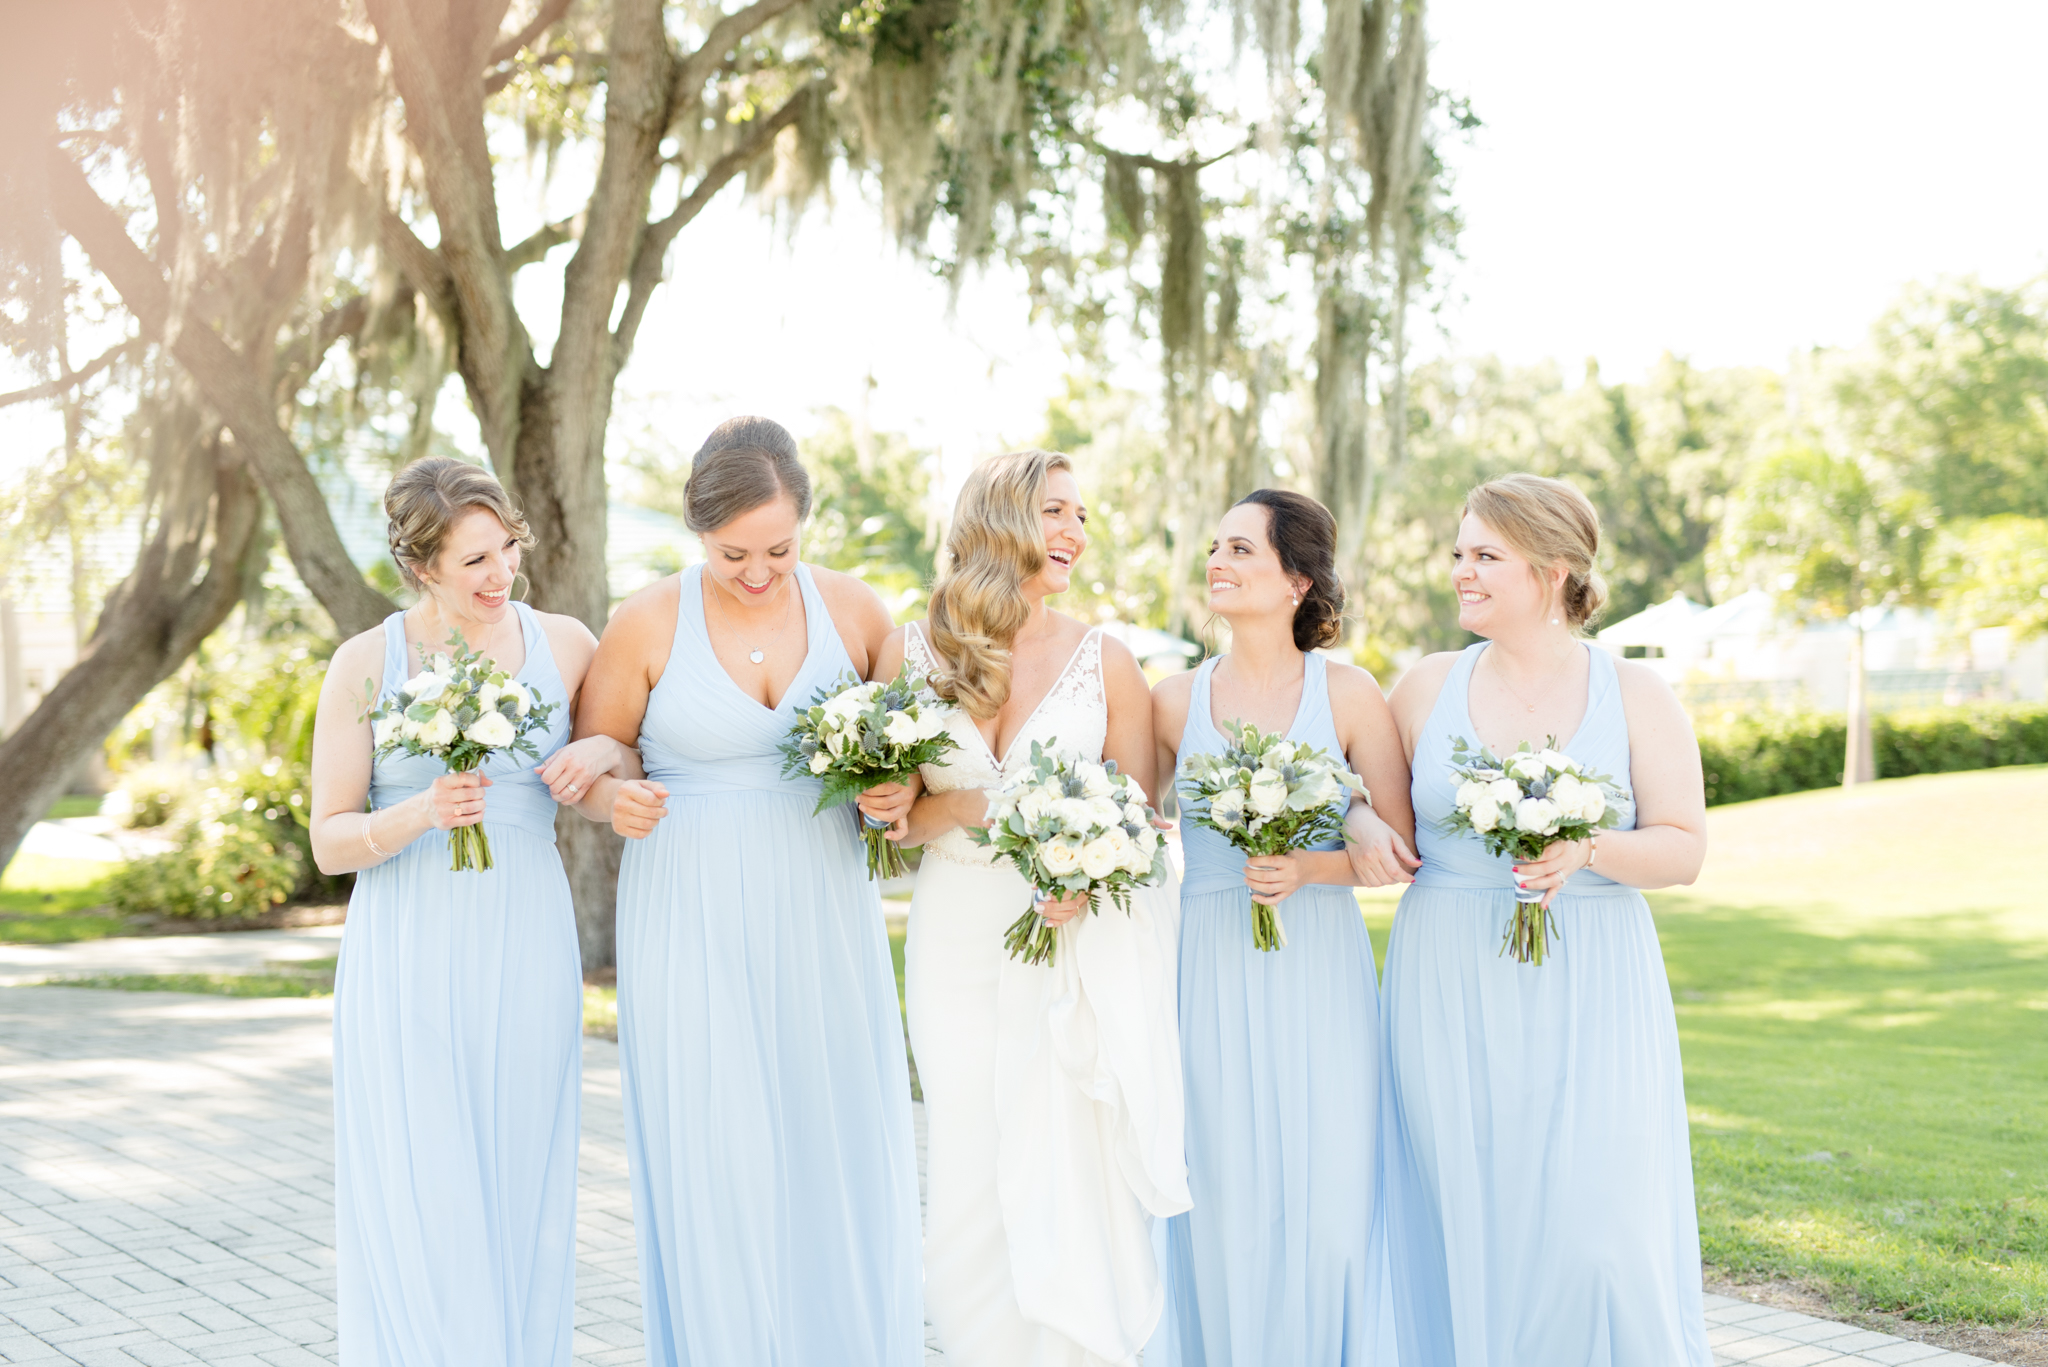 Bride and bridesmaid's laugh as they walk.